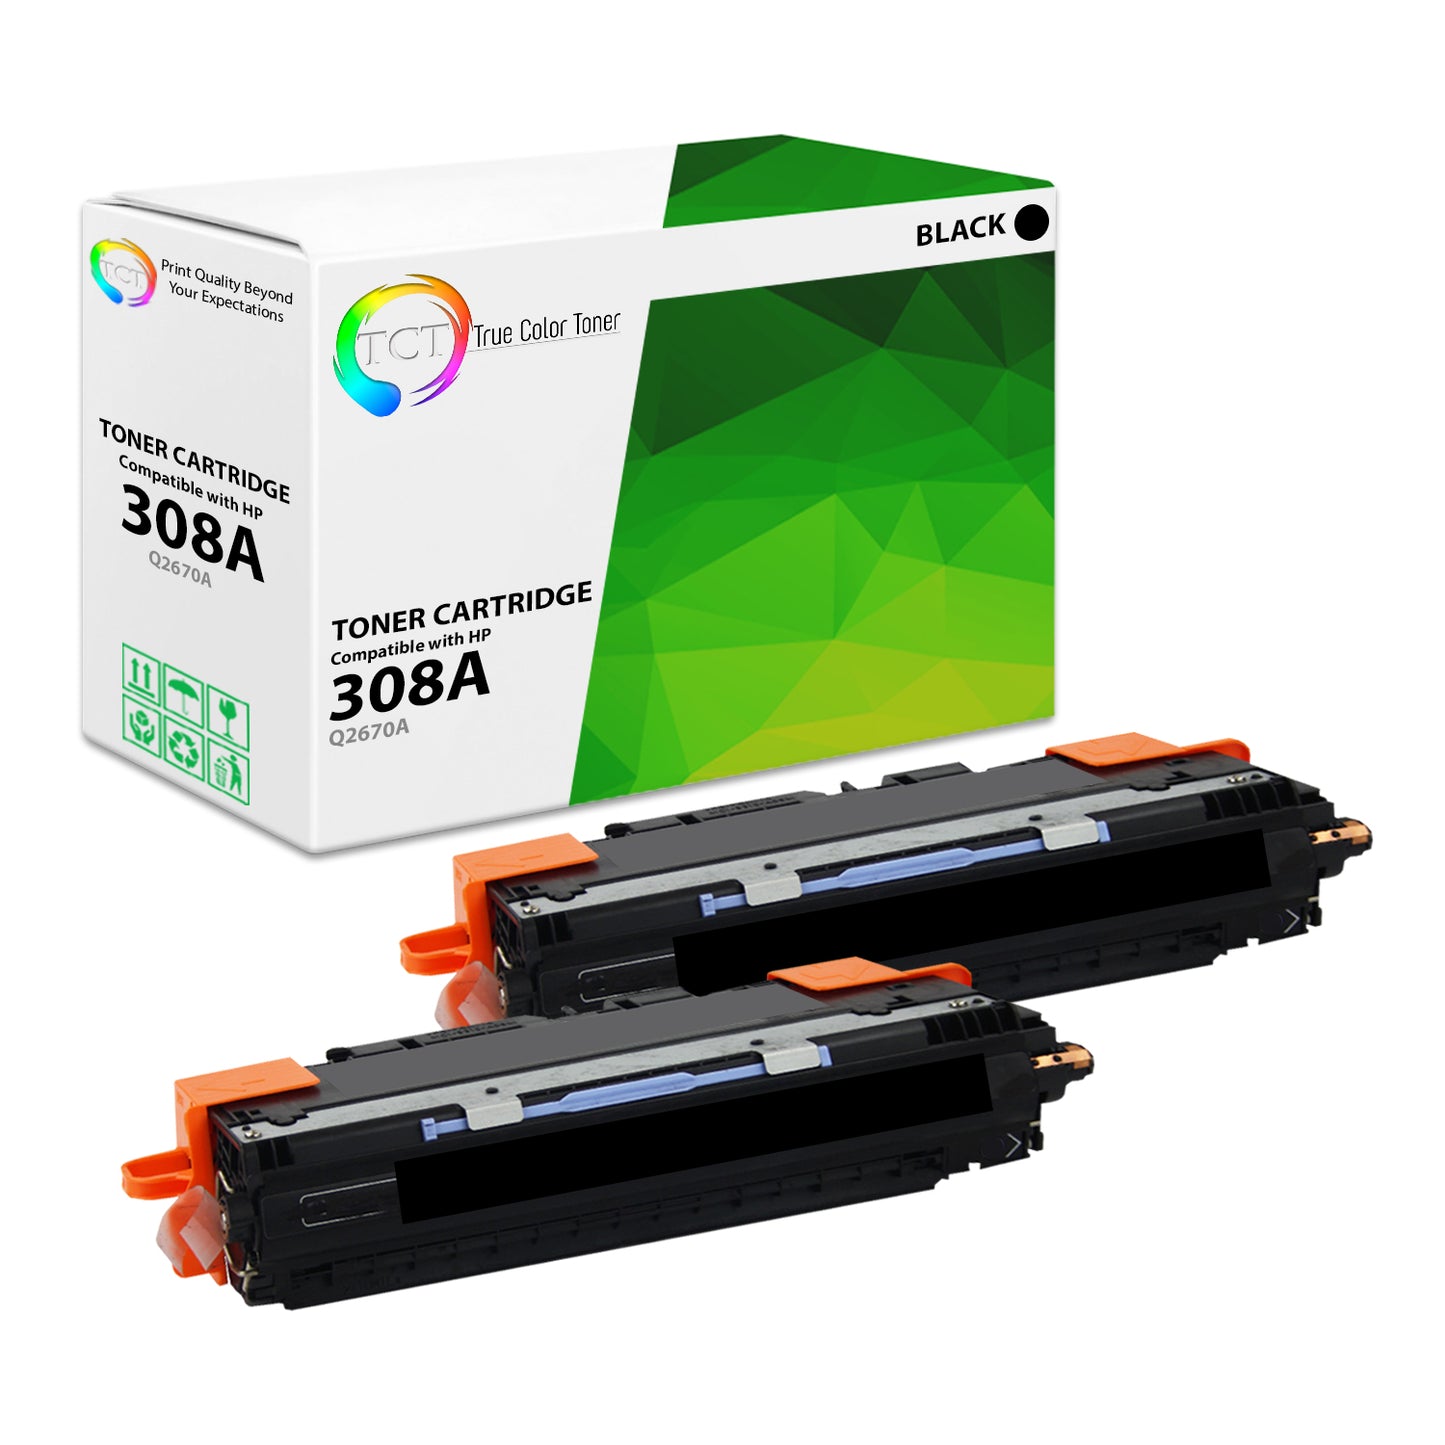 TCT Compatible Toner Cartridge Replacement for the HP 308A Series - 2 Pack Black